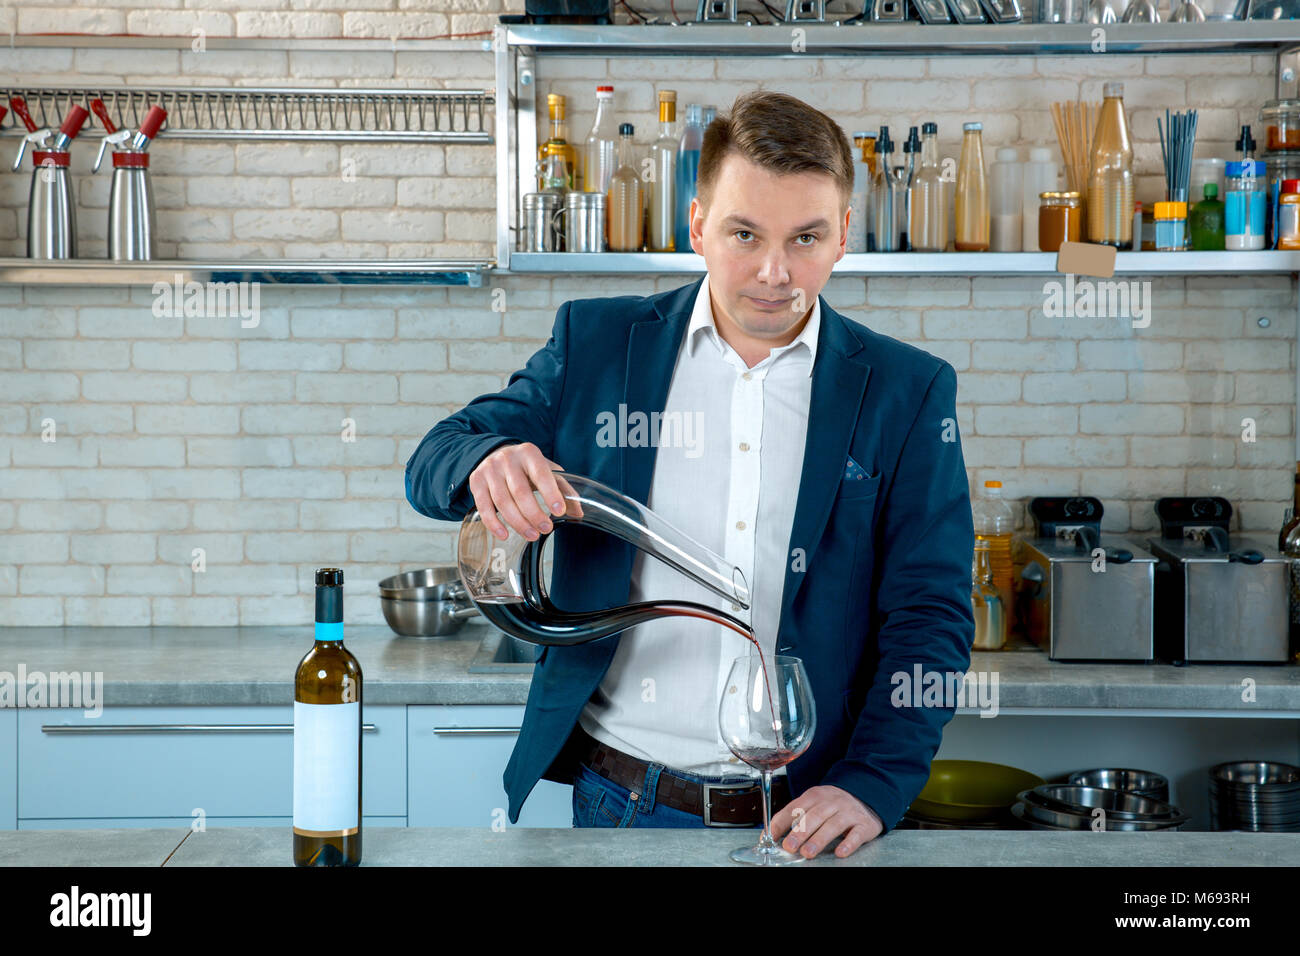 Sommelier pouring red wine into glass from mixing bowl or decanter. Male waiter Stock Photo